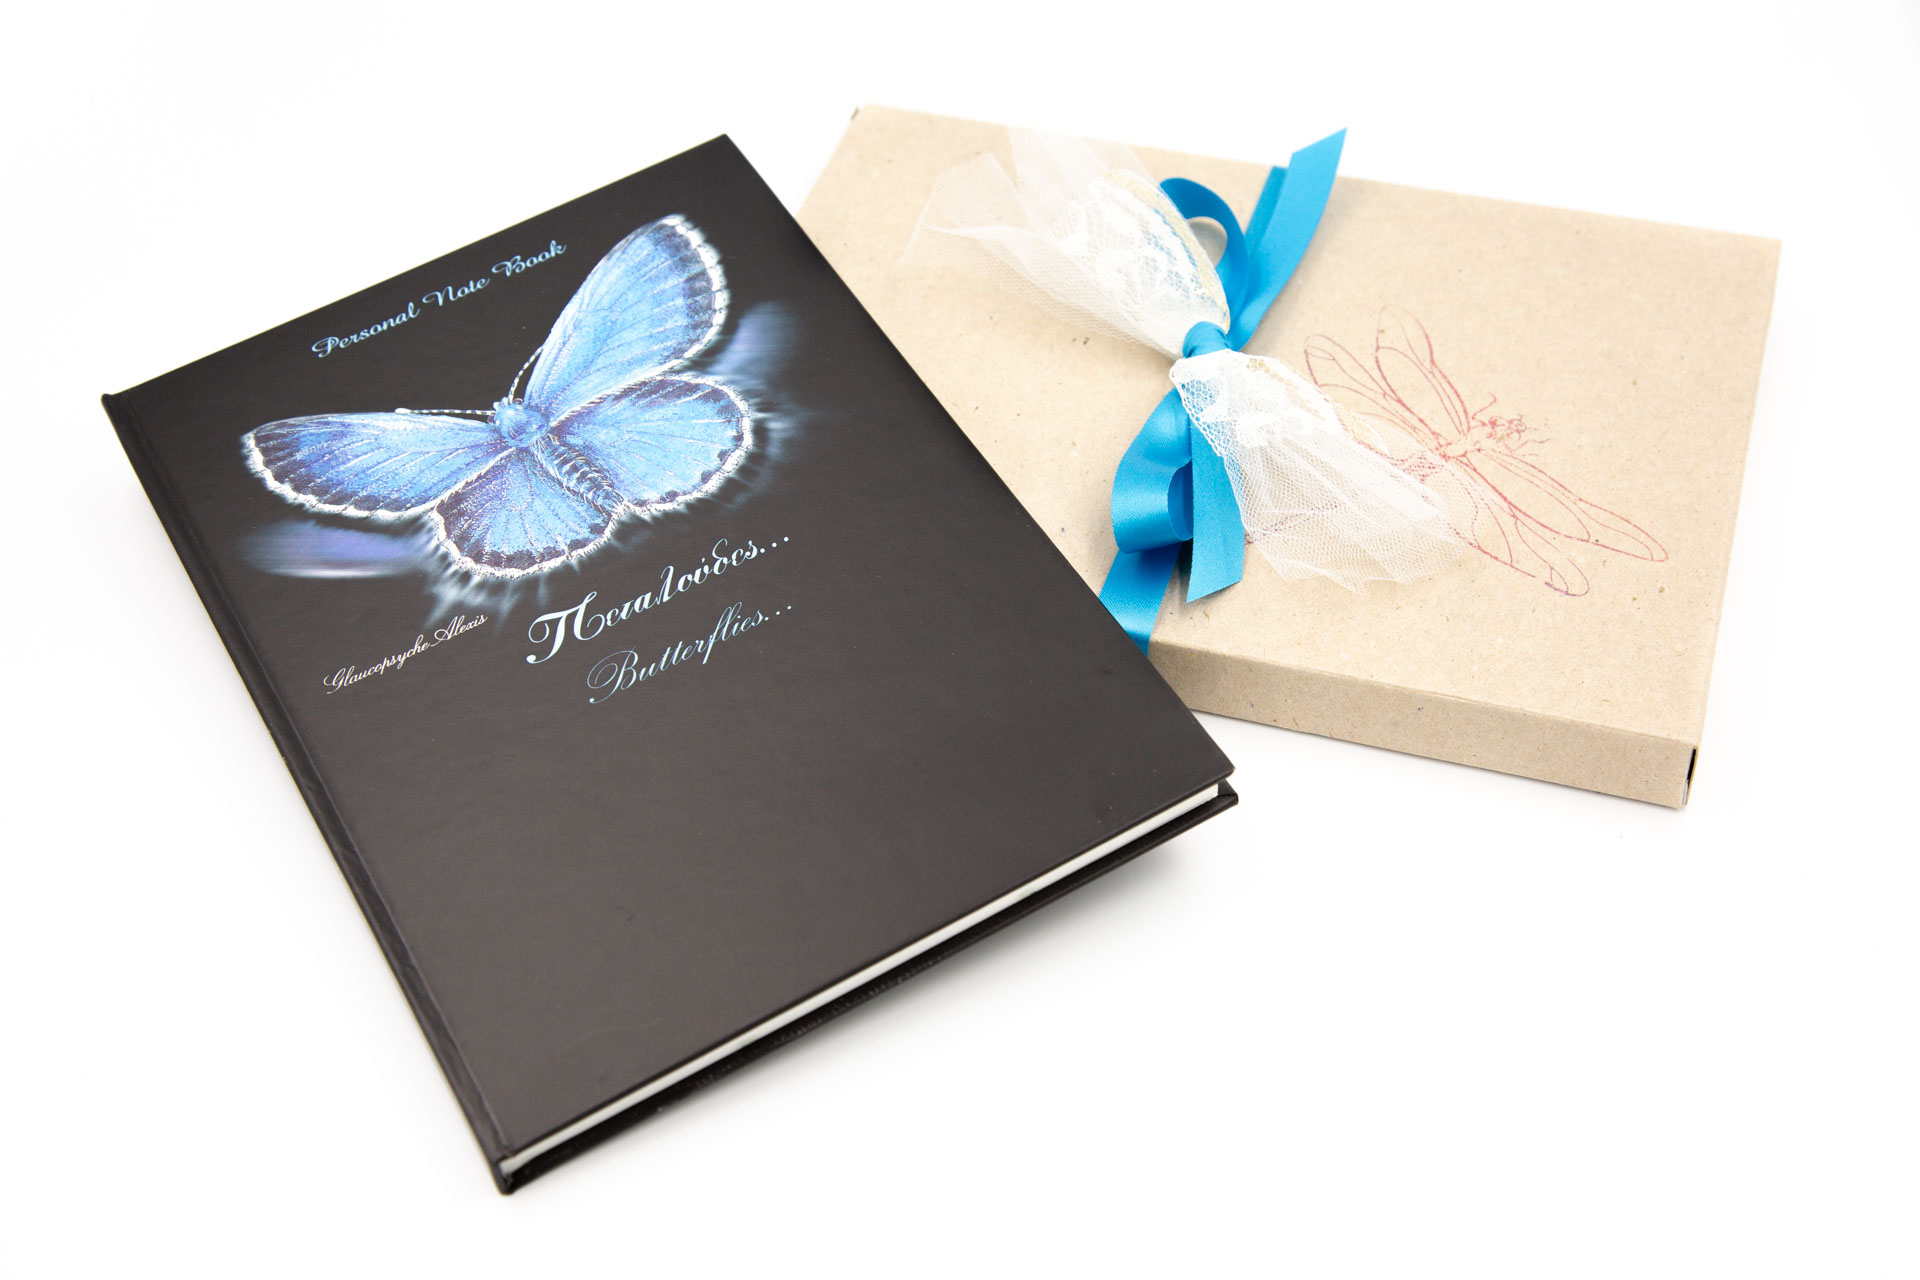 Personal notebook "Butterflies" - Front and Package